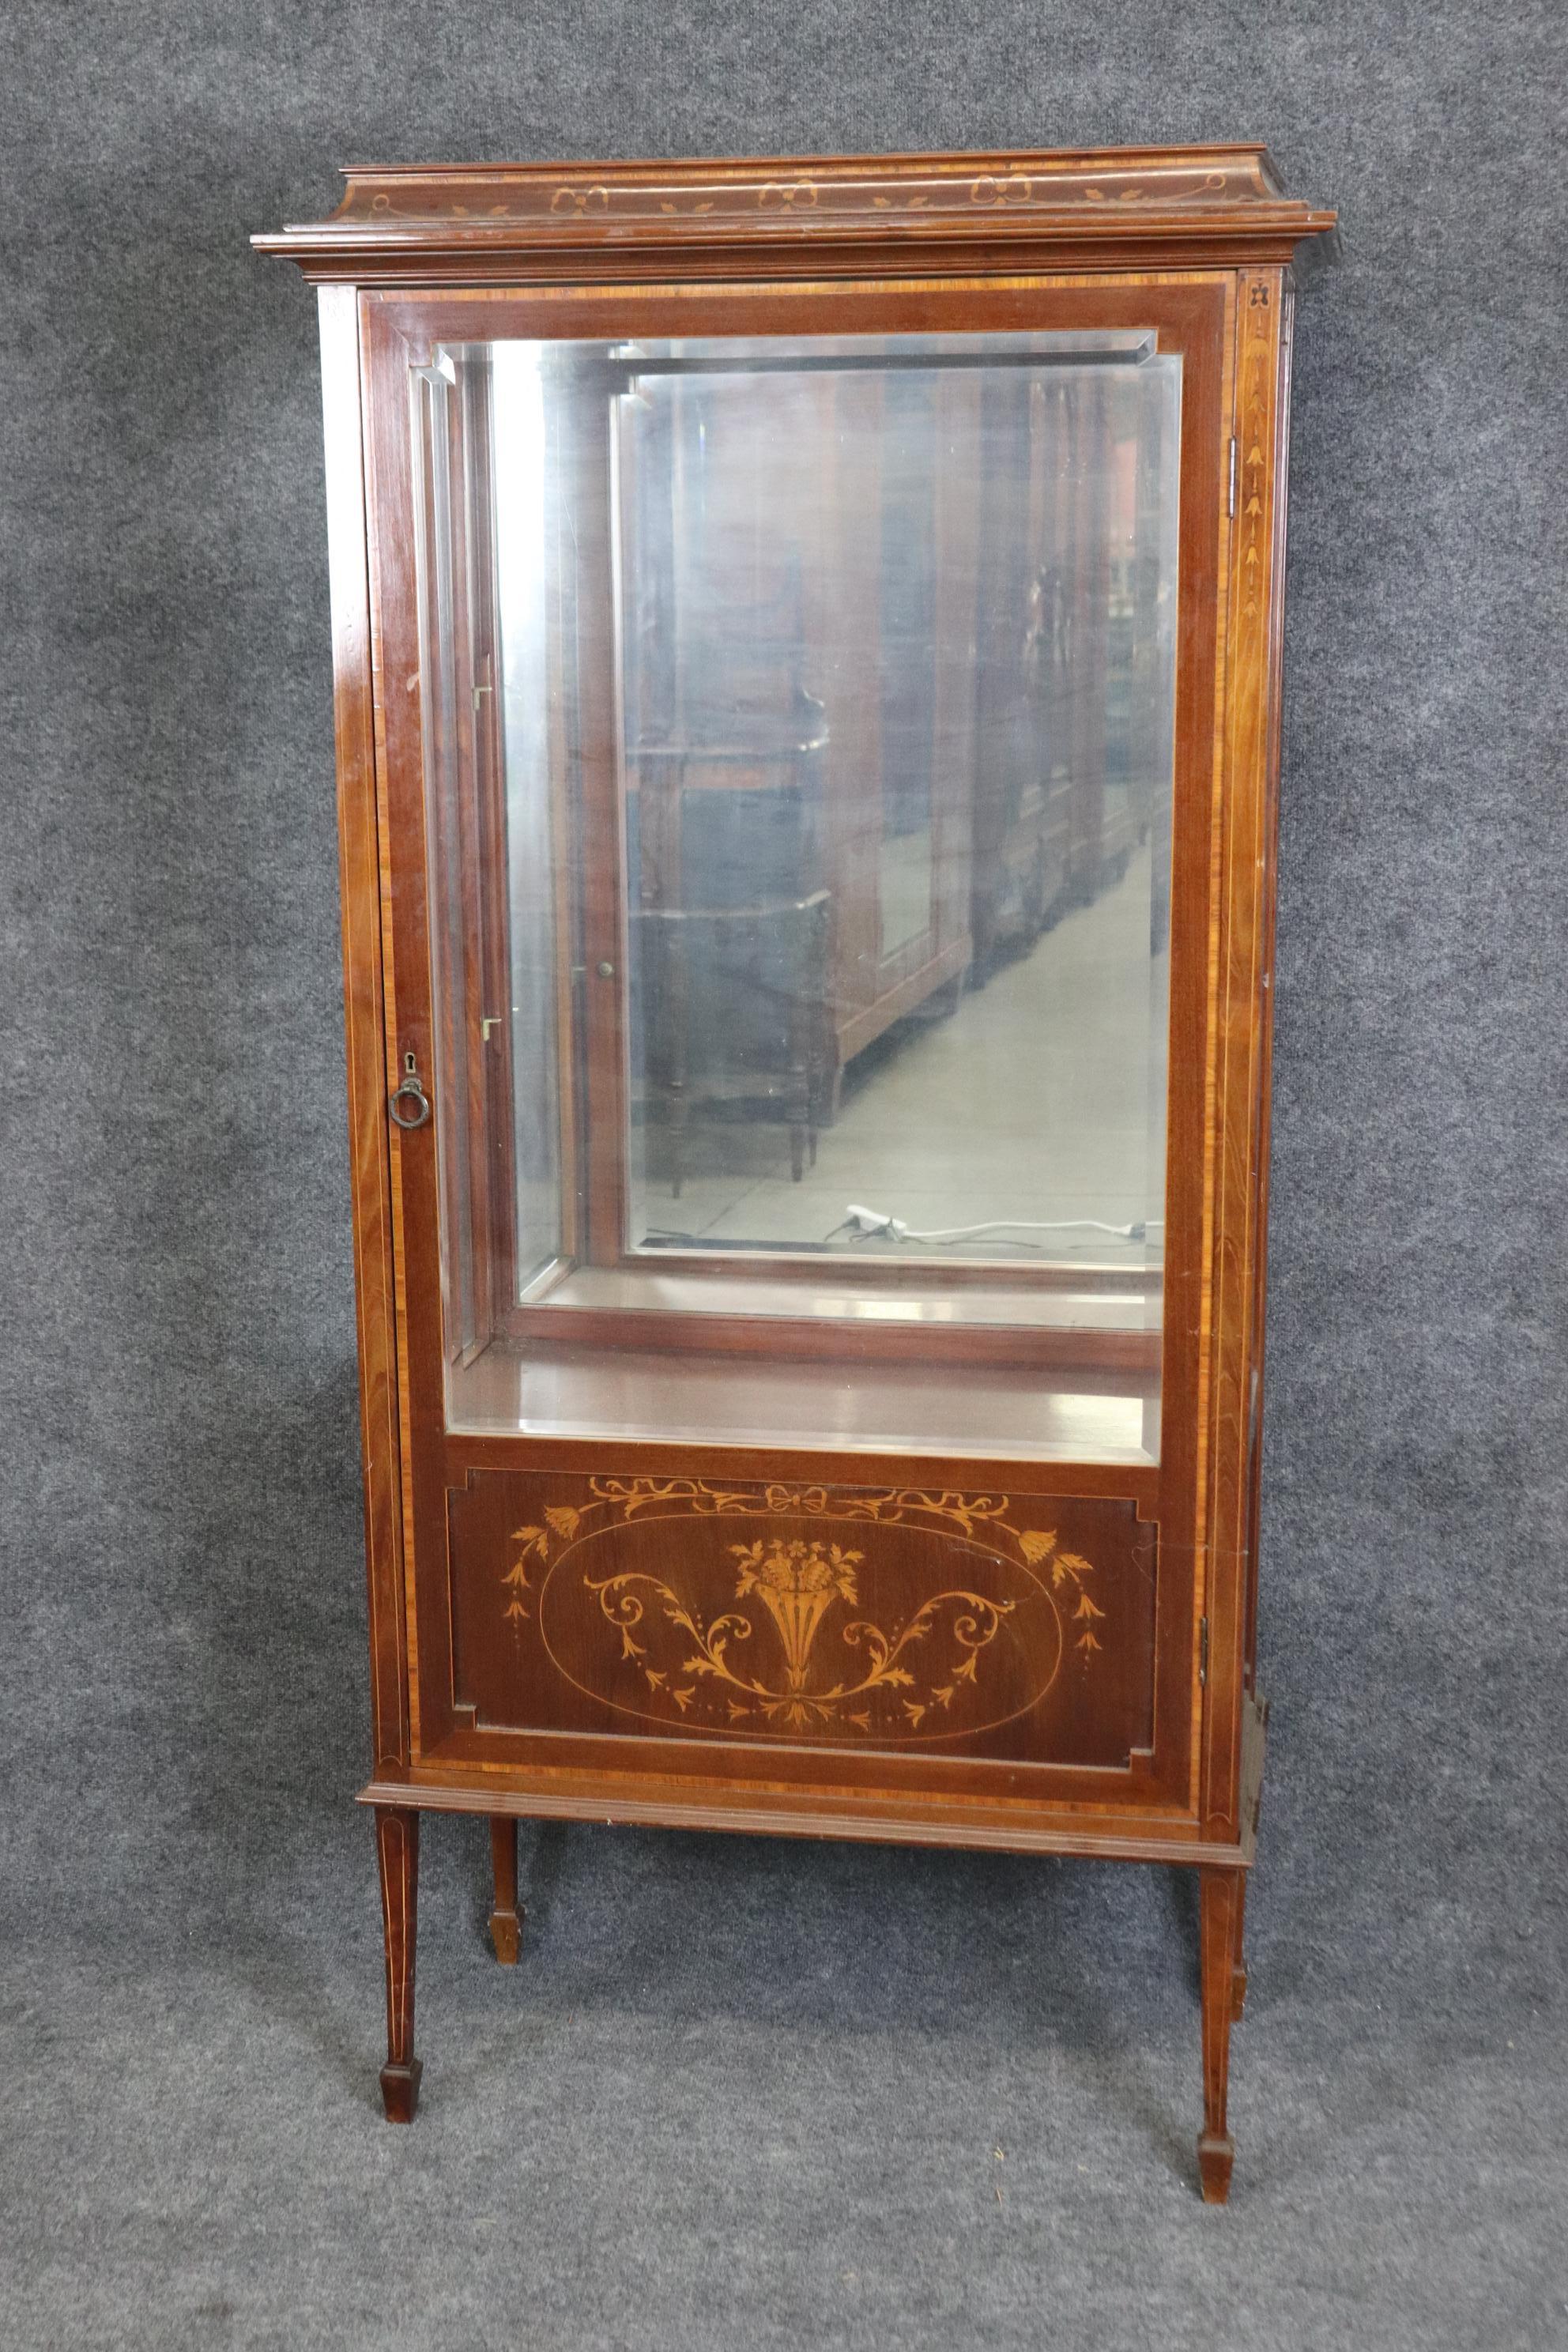 English Edwardian Inlaid Walnut and Satinwood Mirrored Vitrine Curio Cabinet  In Good Condition For Sale In Swedesboro, NJ